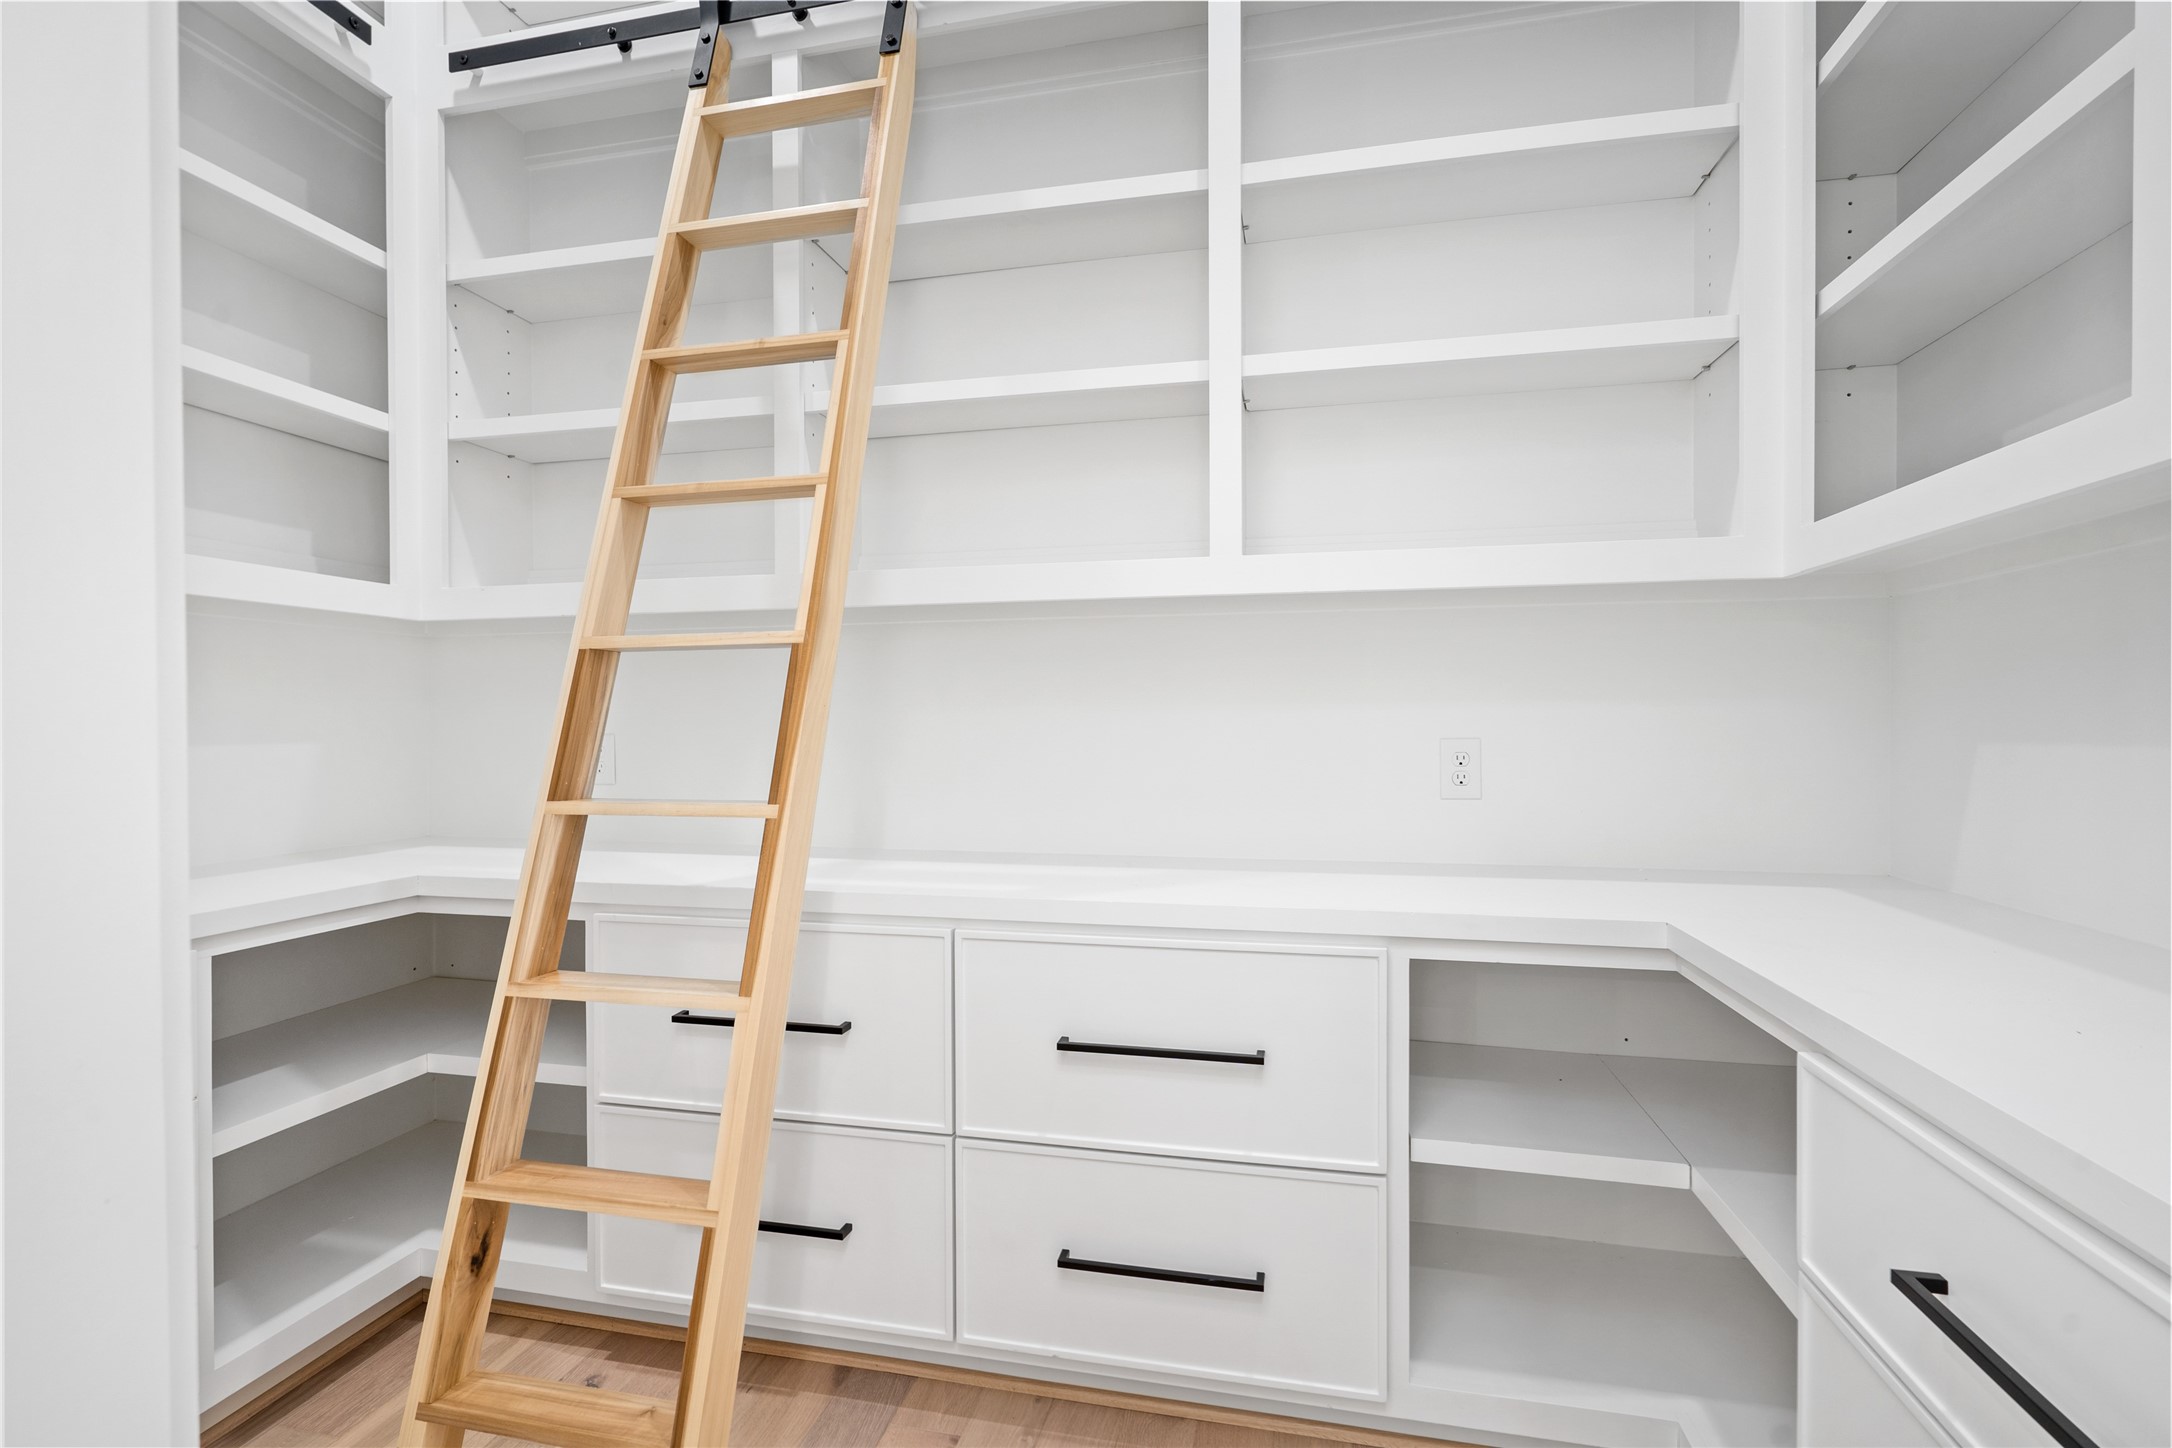 A favorite feature of mine is the huge walk-in pantry that includes counter space for kitchen appliances, outlets and a custom built ladder to provide access to storage out of reach. The slots on the right and left are perfect for lazy susans if you so choose!